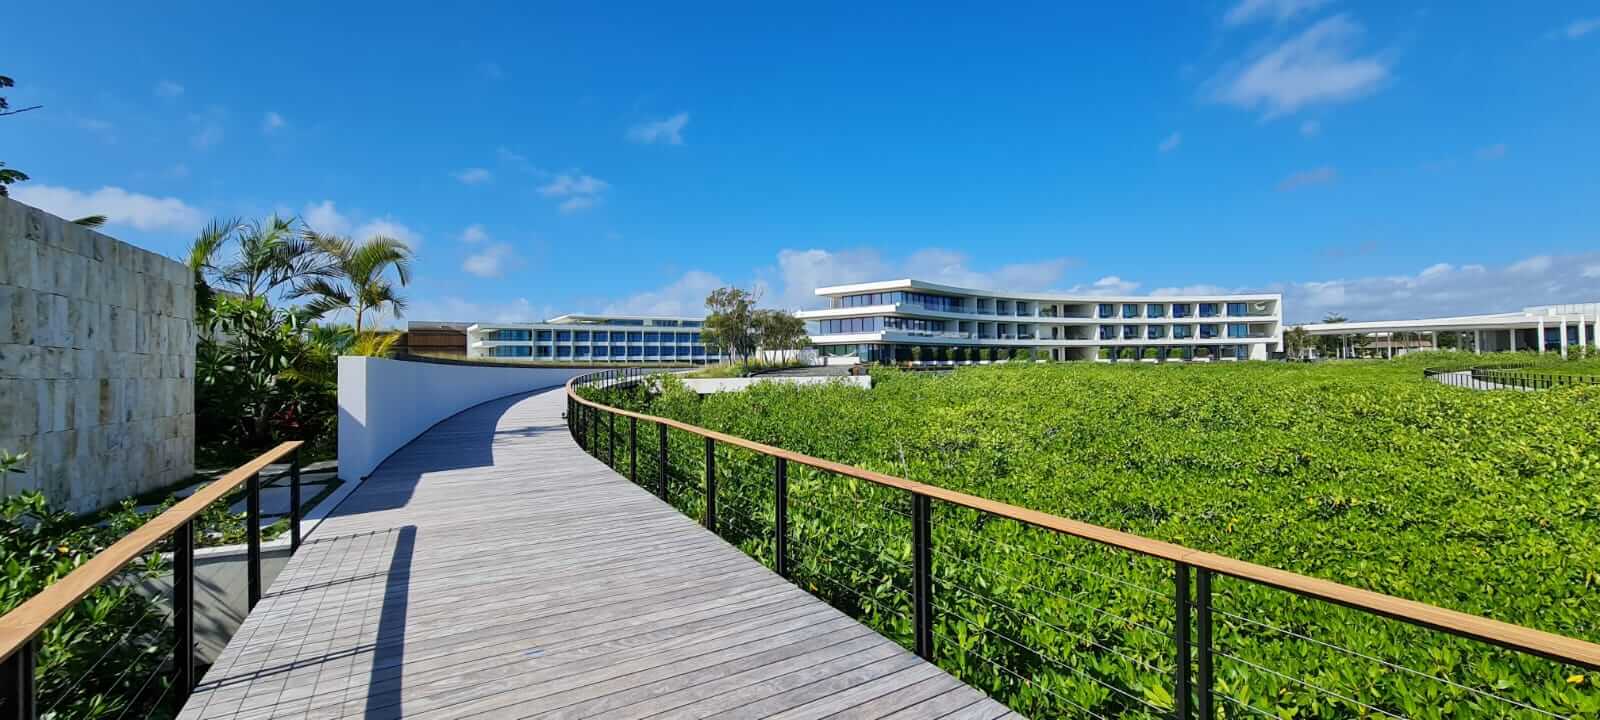 A resort hotel and walkway surround a dense mangrove forest in Mexico.